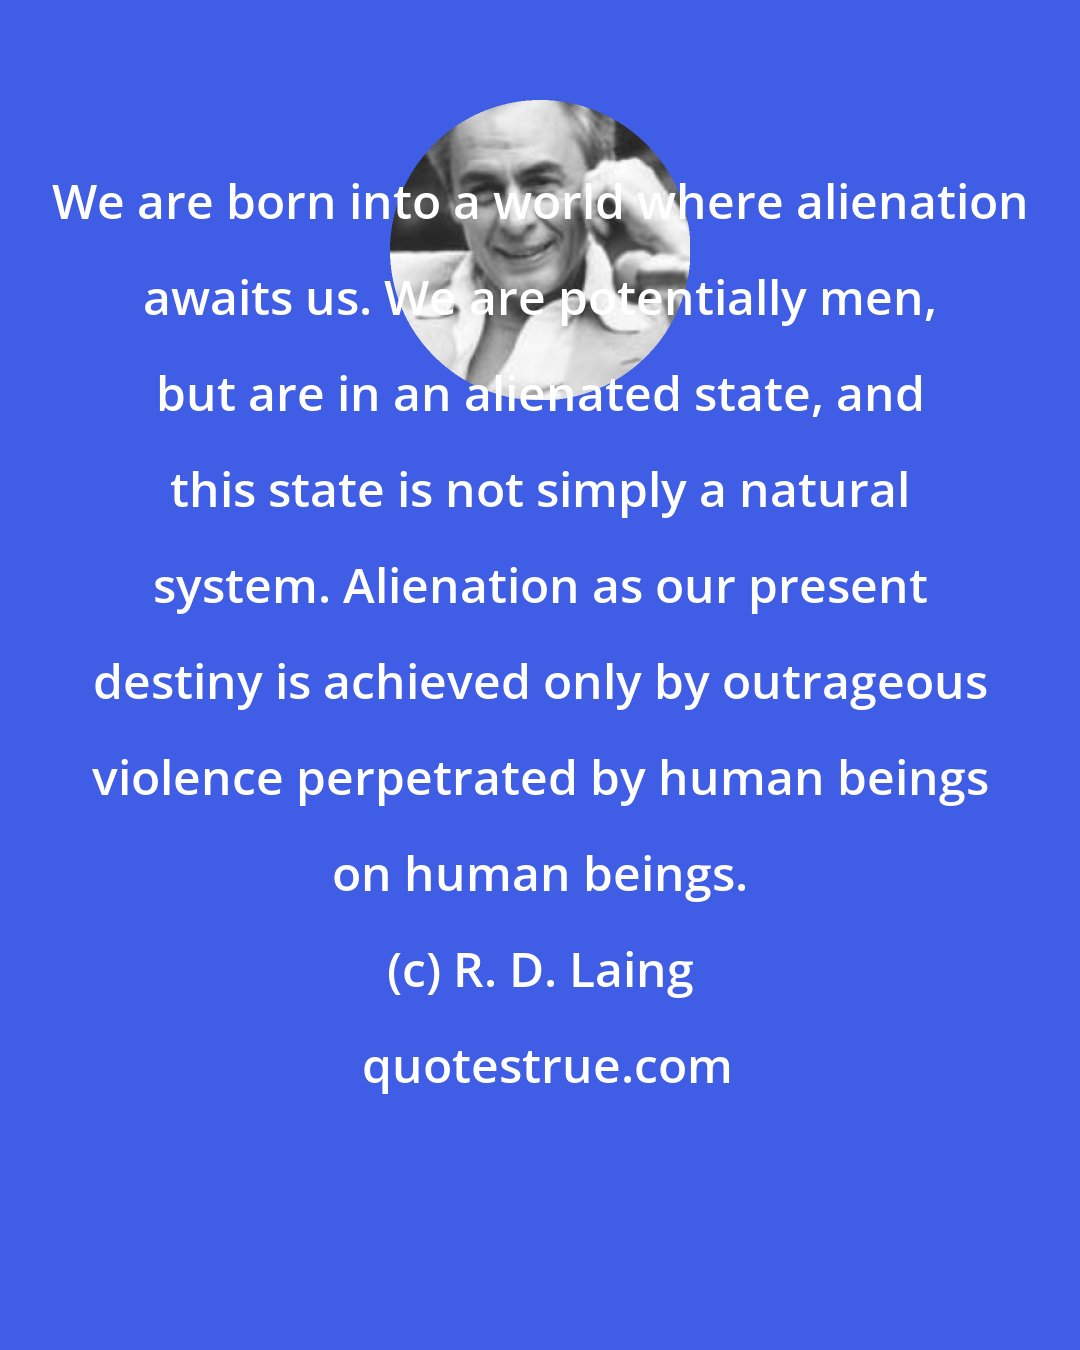 R. D. Laing: We are born into a world where alienation awaits us. We are potentially men, but are in an alienated state, and this state is not simply a natural system. Alienation as our present destiny is achieved only by outrageous violence perpetrated by human beings on human beings.